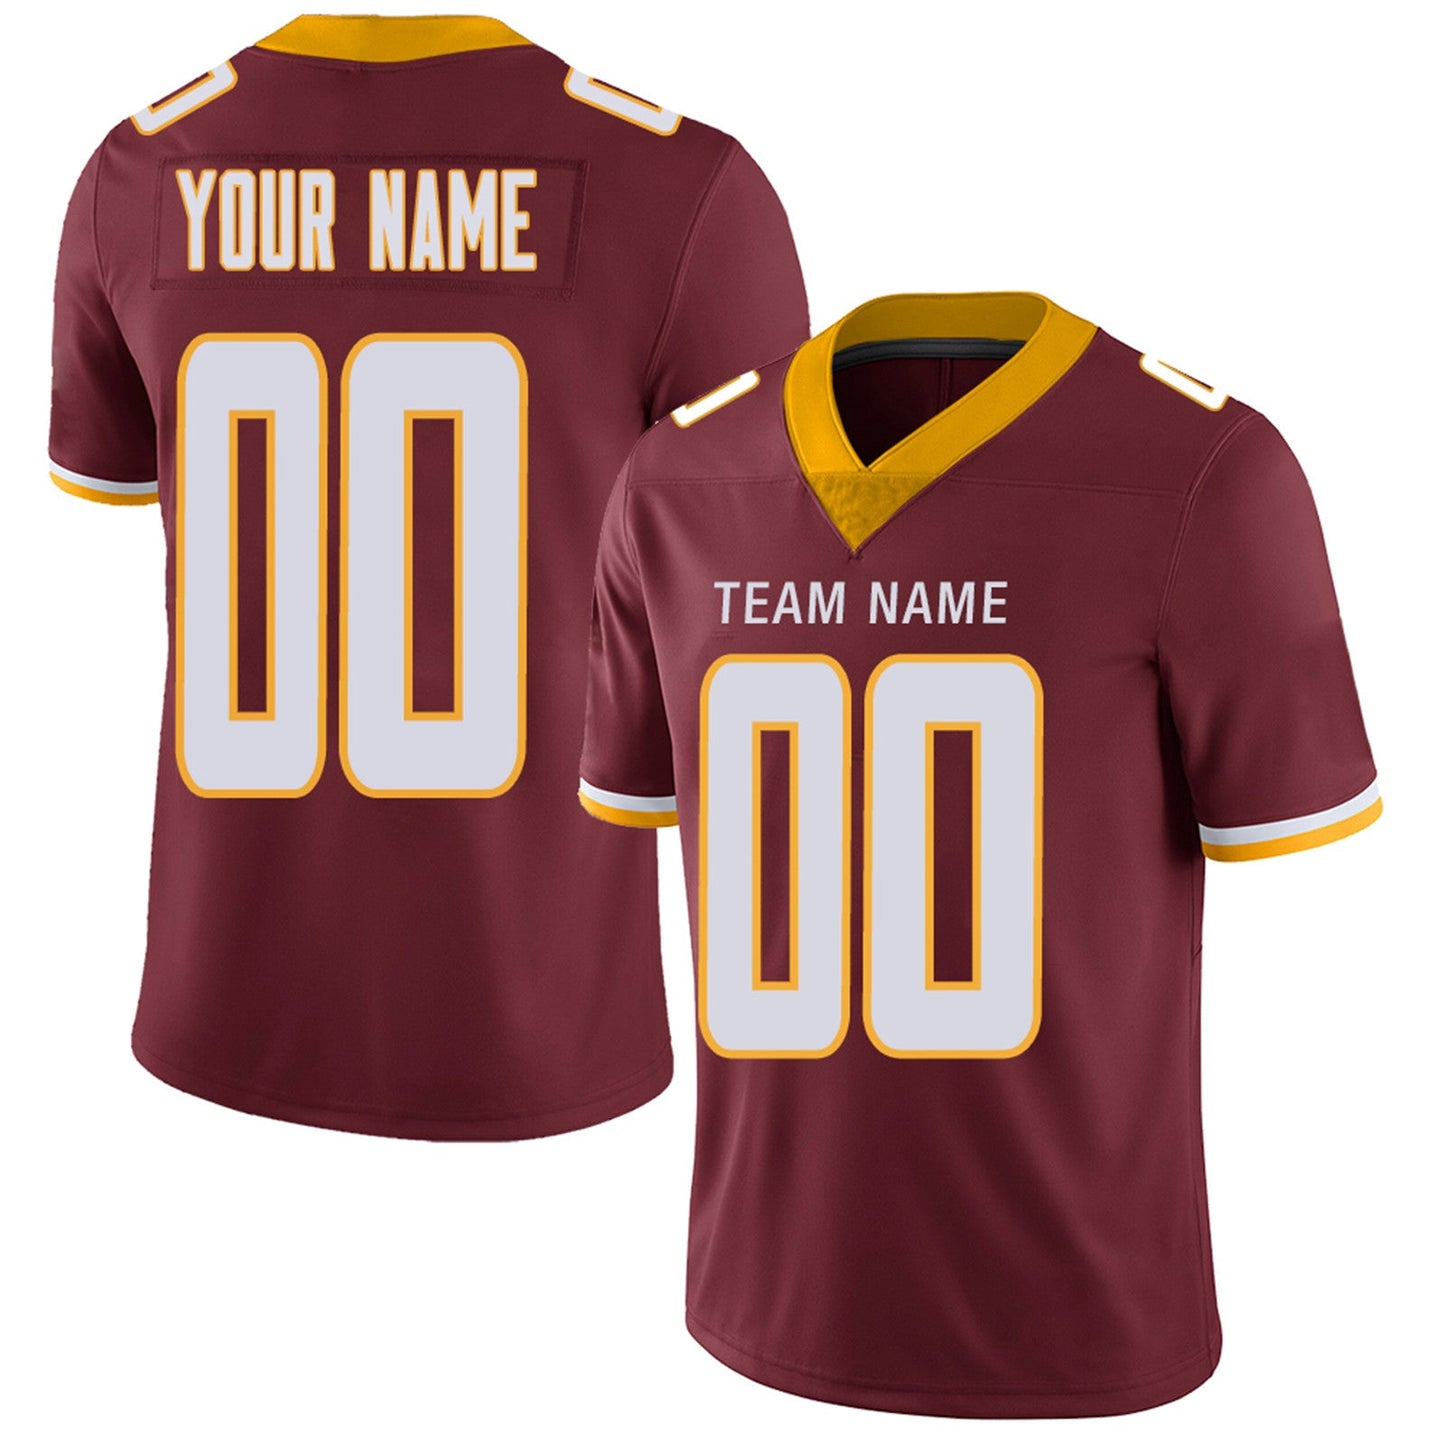 Custom W.Football Team Player or Personalized Design Your Own Name for Men's Women's Youth Jerseys Burgundy Football Jerseys